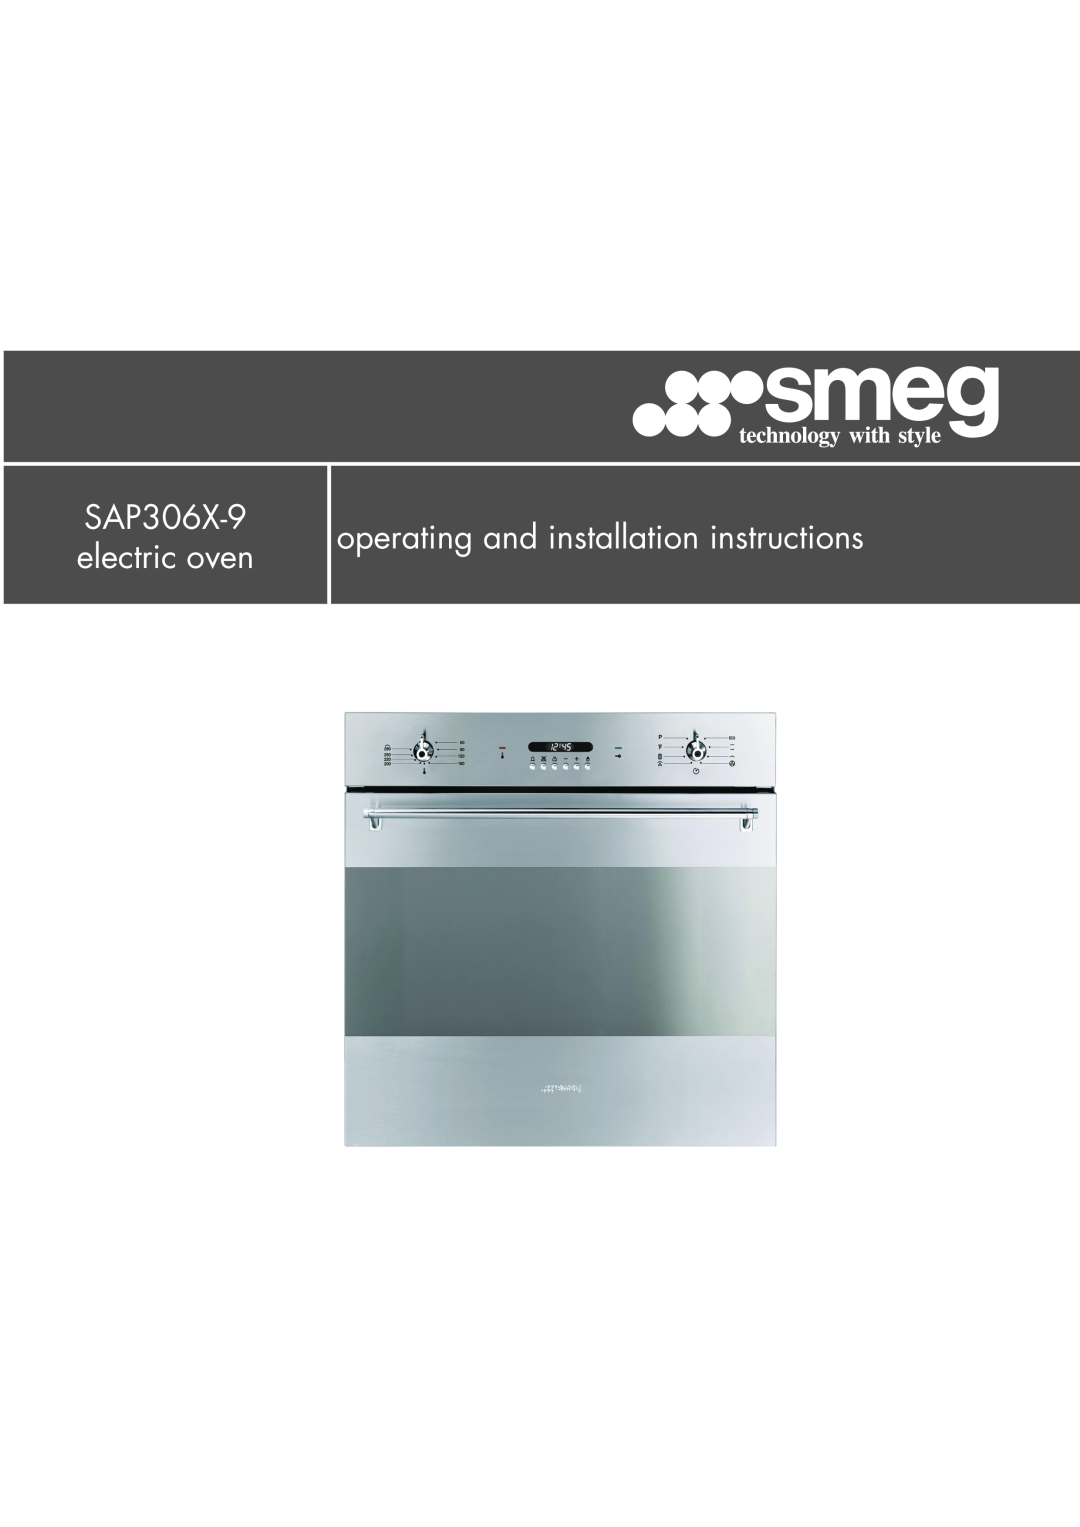 Smeg installation instructions SAP306X-9 electric oven, operating and installation instructions 